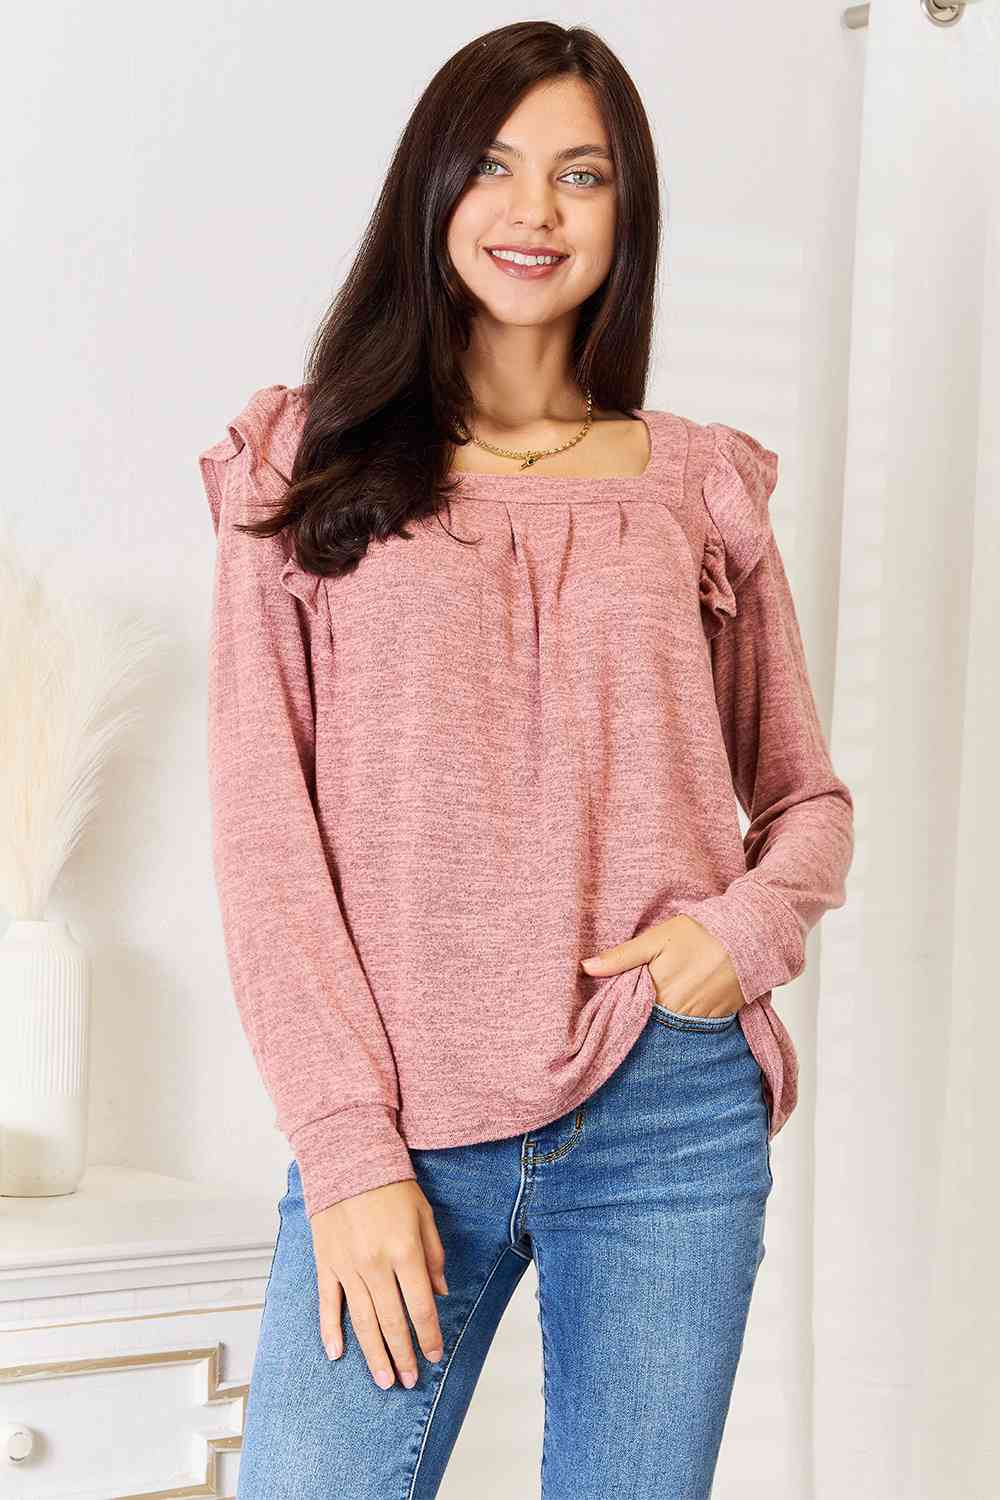 Double Take Square Neck Ruffle Shoulder Long Sleeve Top - 2 Color Options!